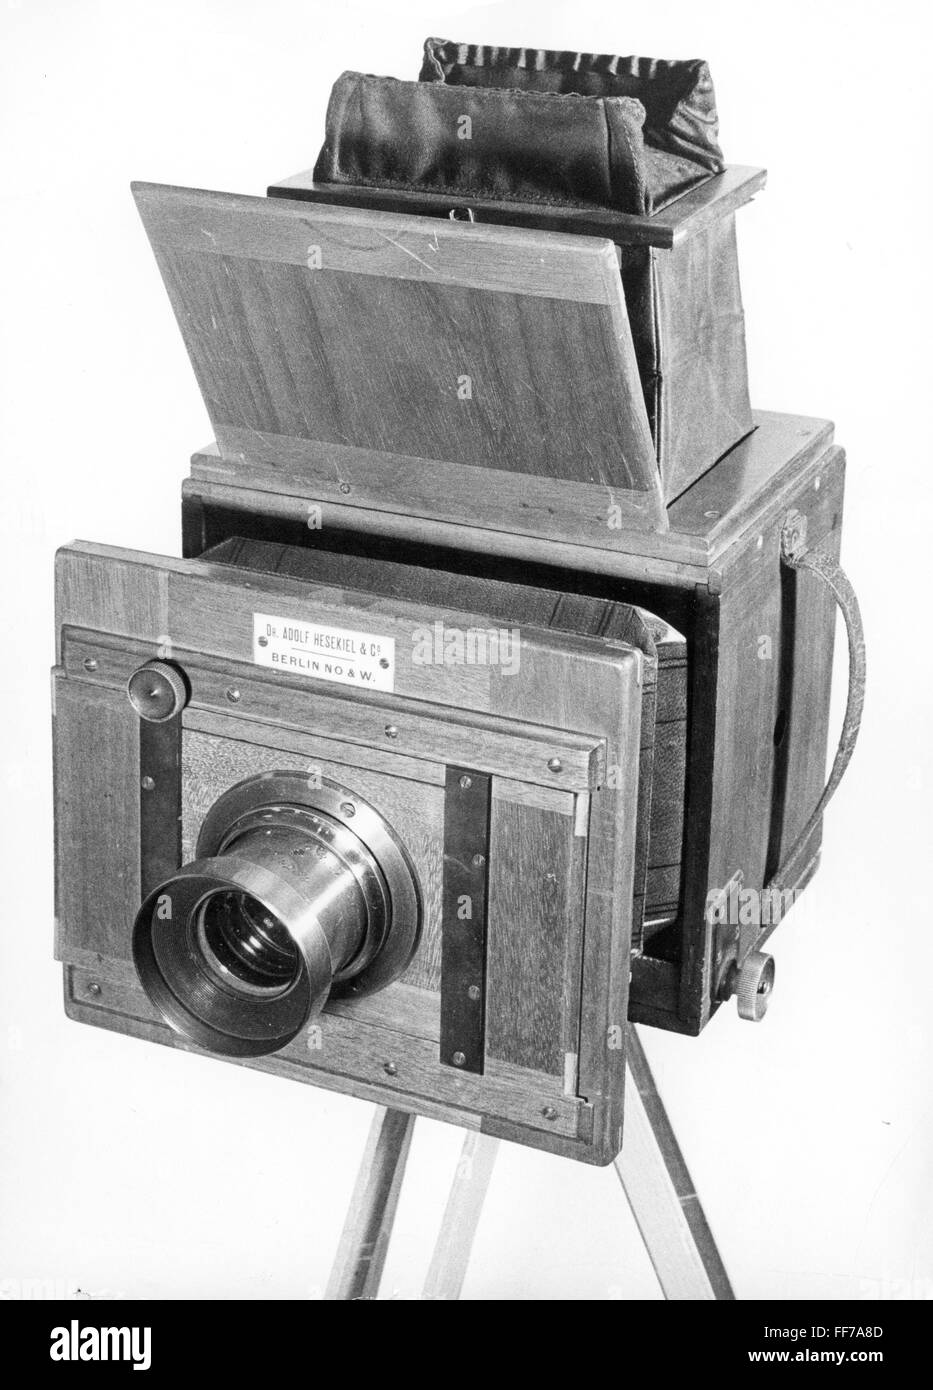 photography, cameras, reflex camera with swing-up mirror by Dr. Adolf Hesekiel & Co., Berlin, circa 1890, Additional-Rights-Clearences-Not Available Stock Photo